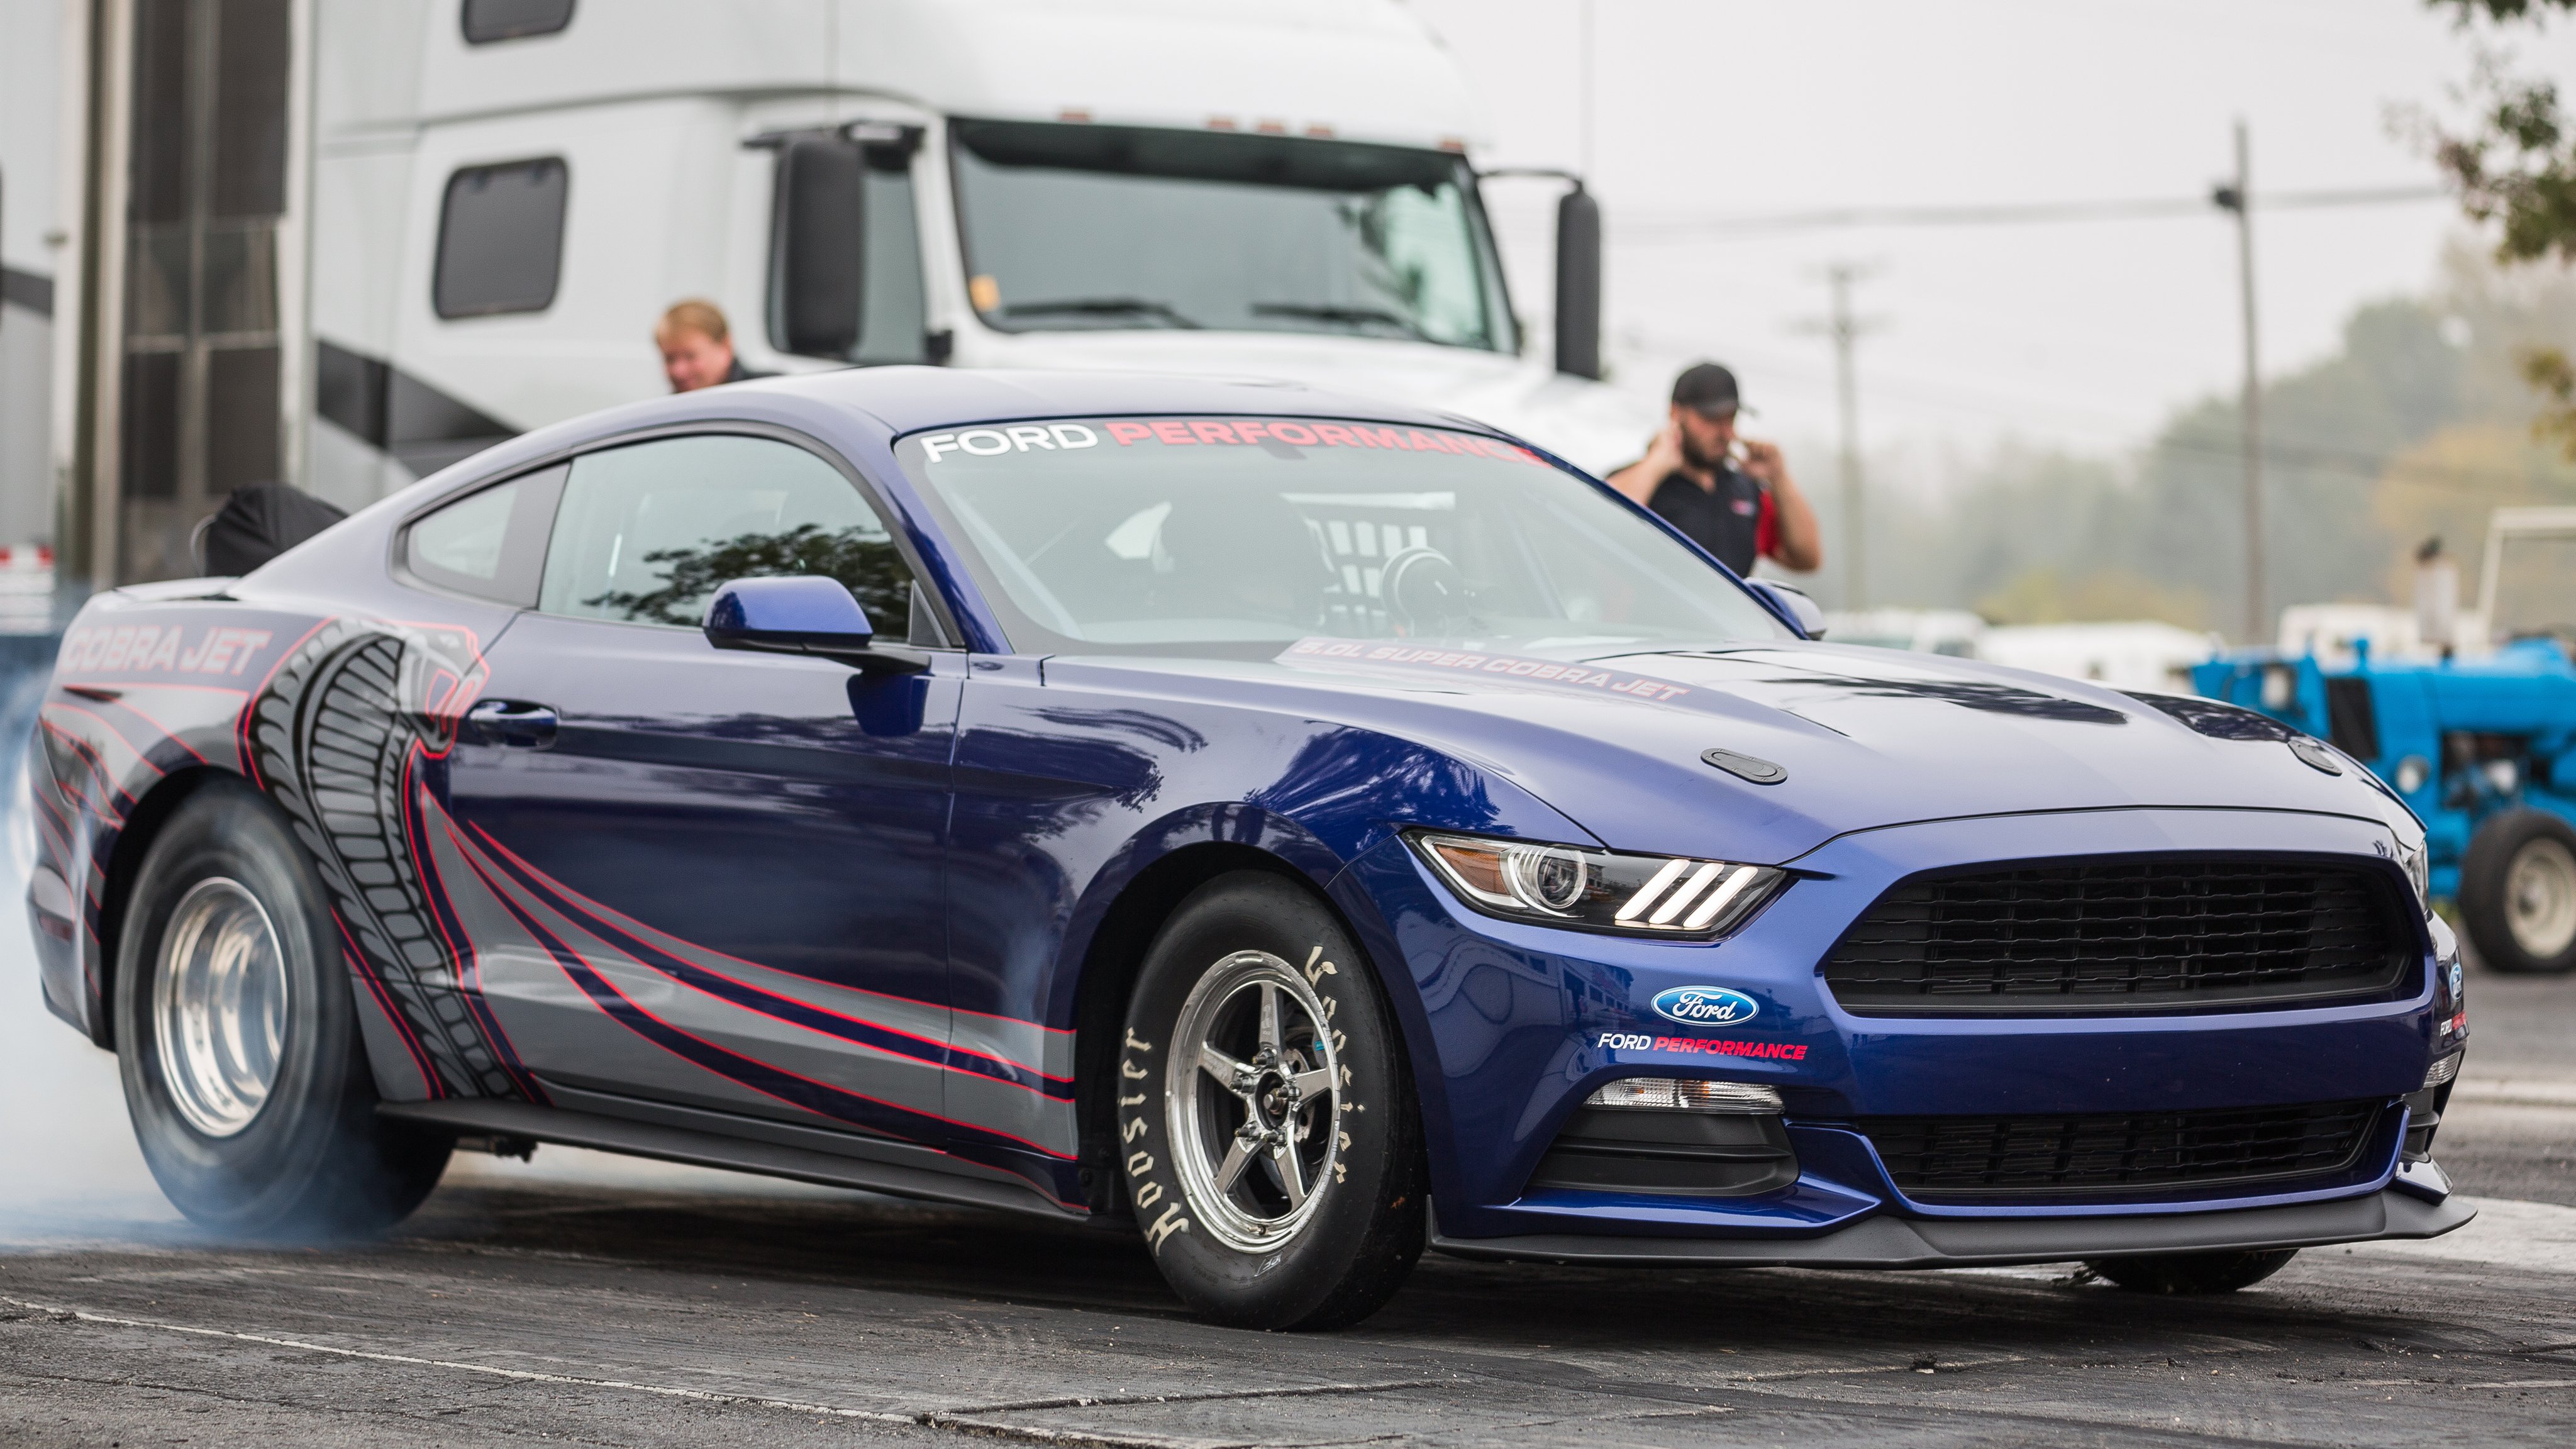 2016, Ford, Mustang, Cobra, Jet, Drag, Racing, Race, Muscle, Hot, Rod ...